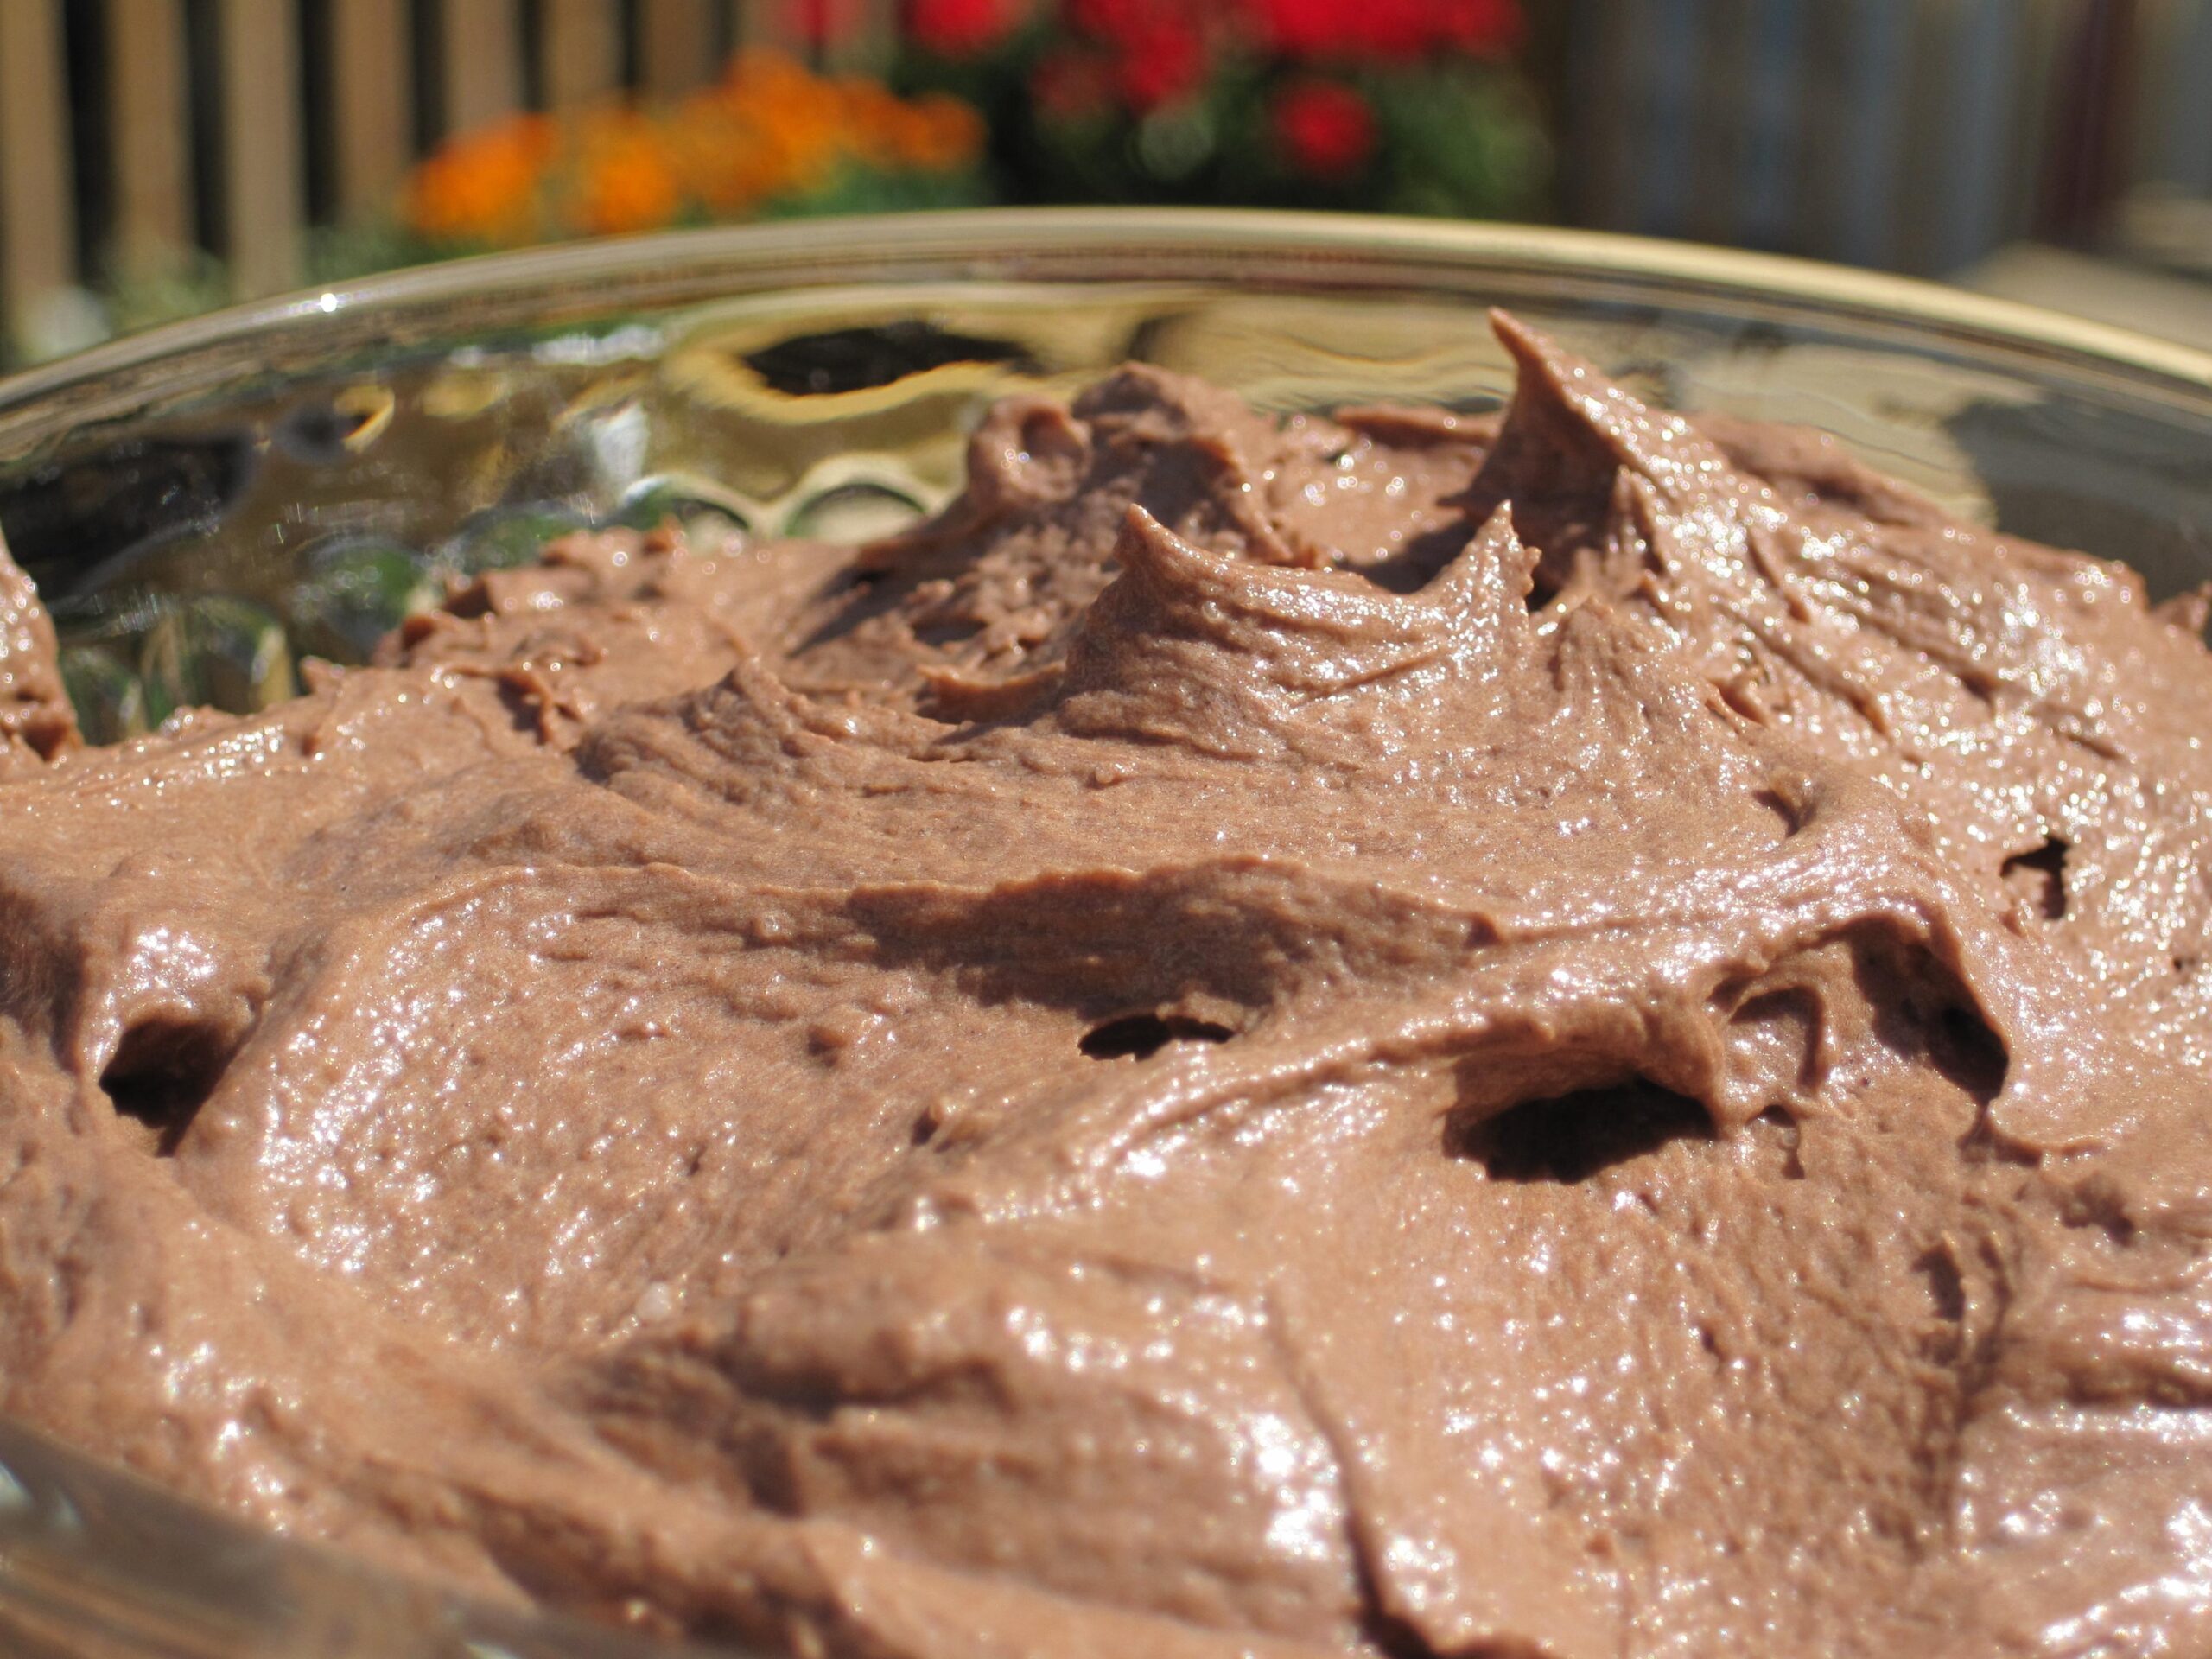  Dive into the chocolate heaven with this indulgent frosting!